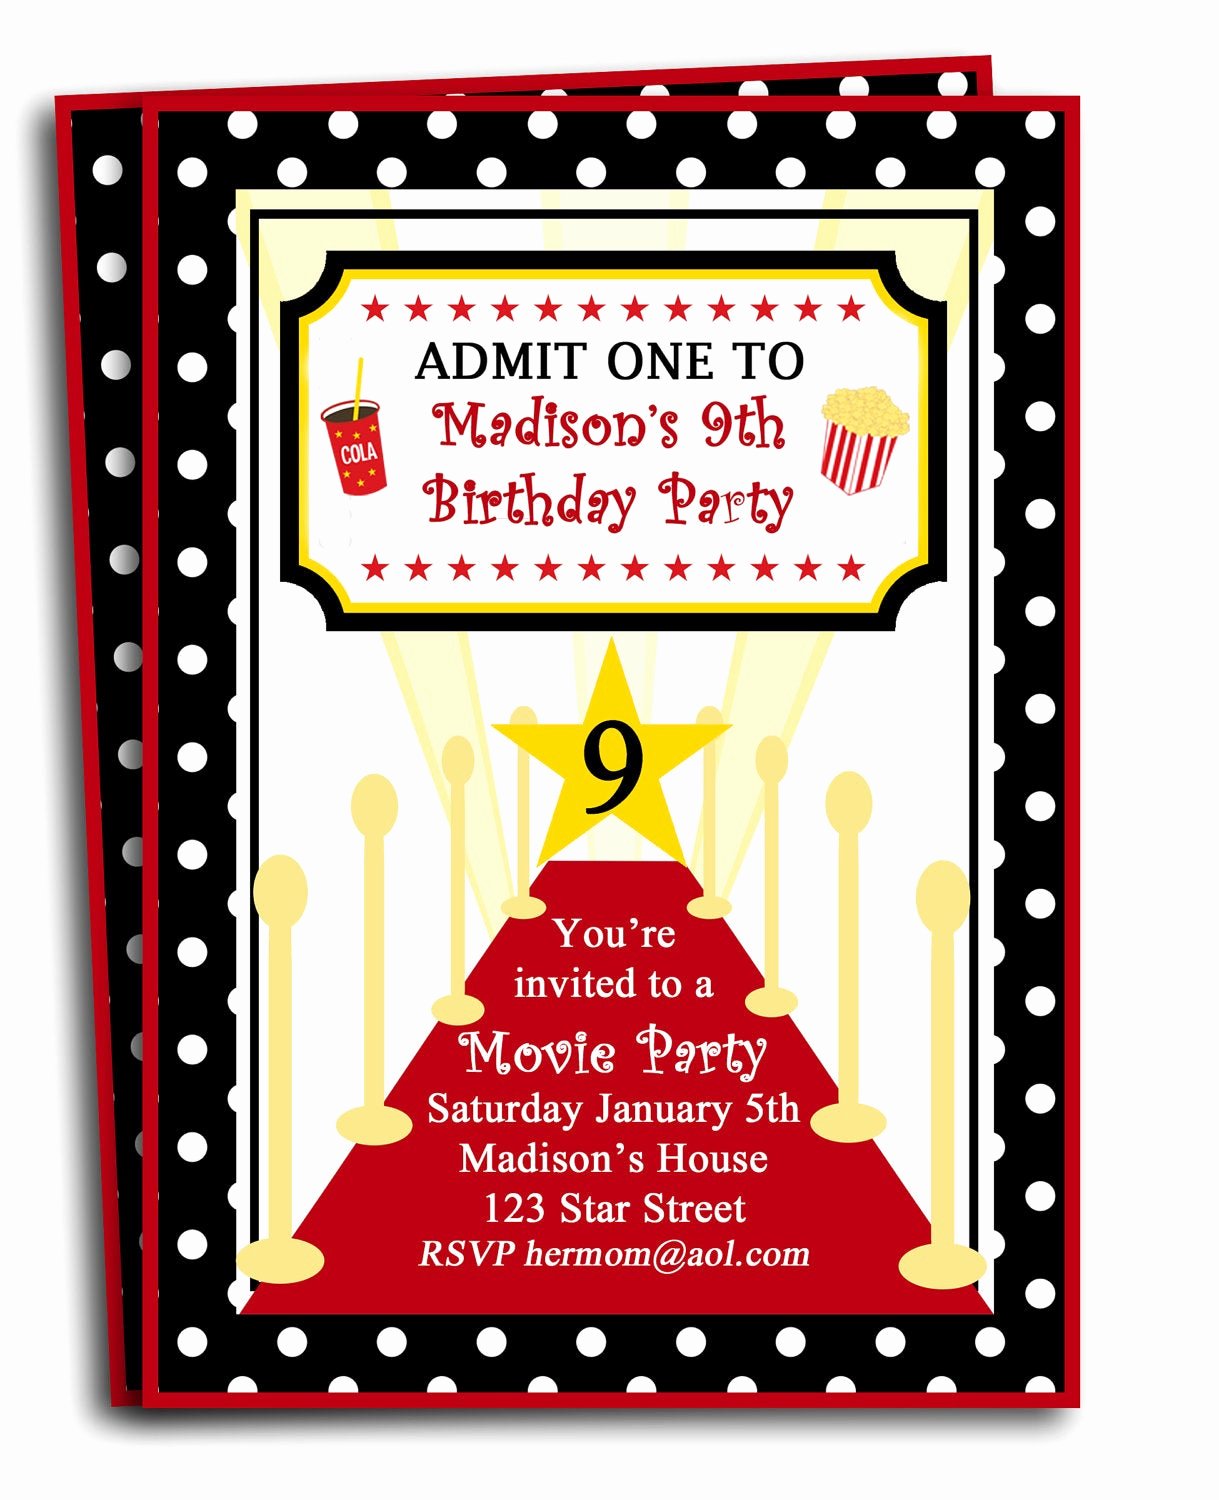 Red Carpet Invitation Template Free Fresh Red Carpet Party Invitation Printable or Printed with Free